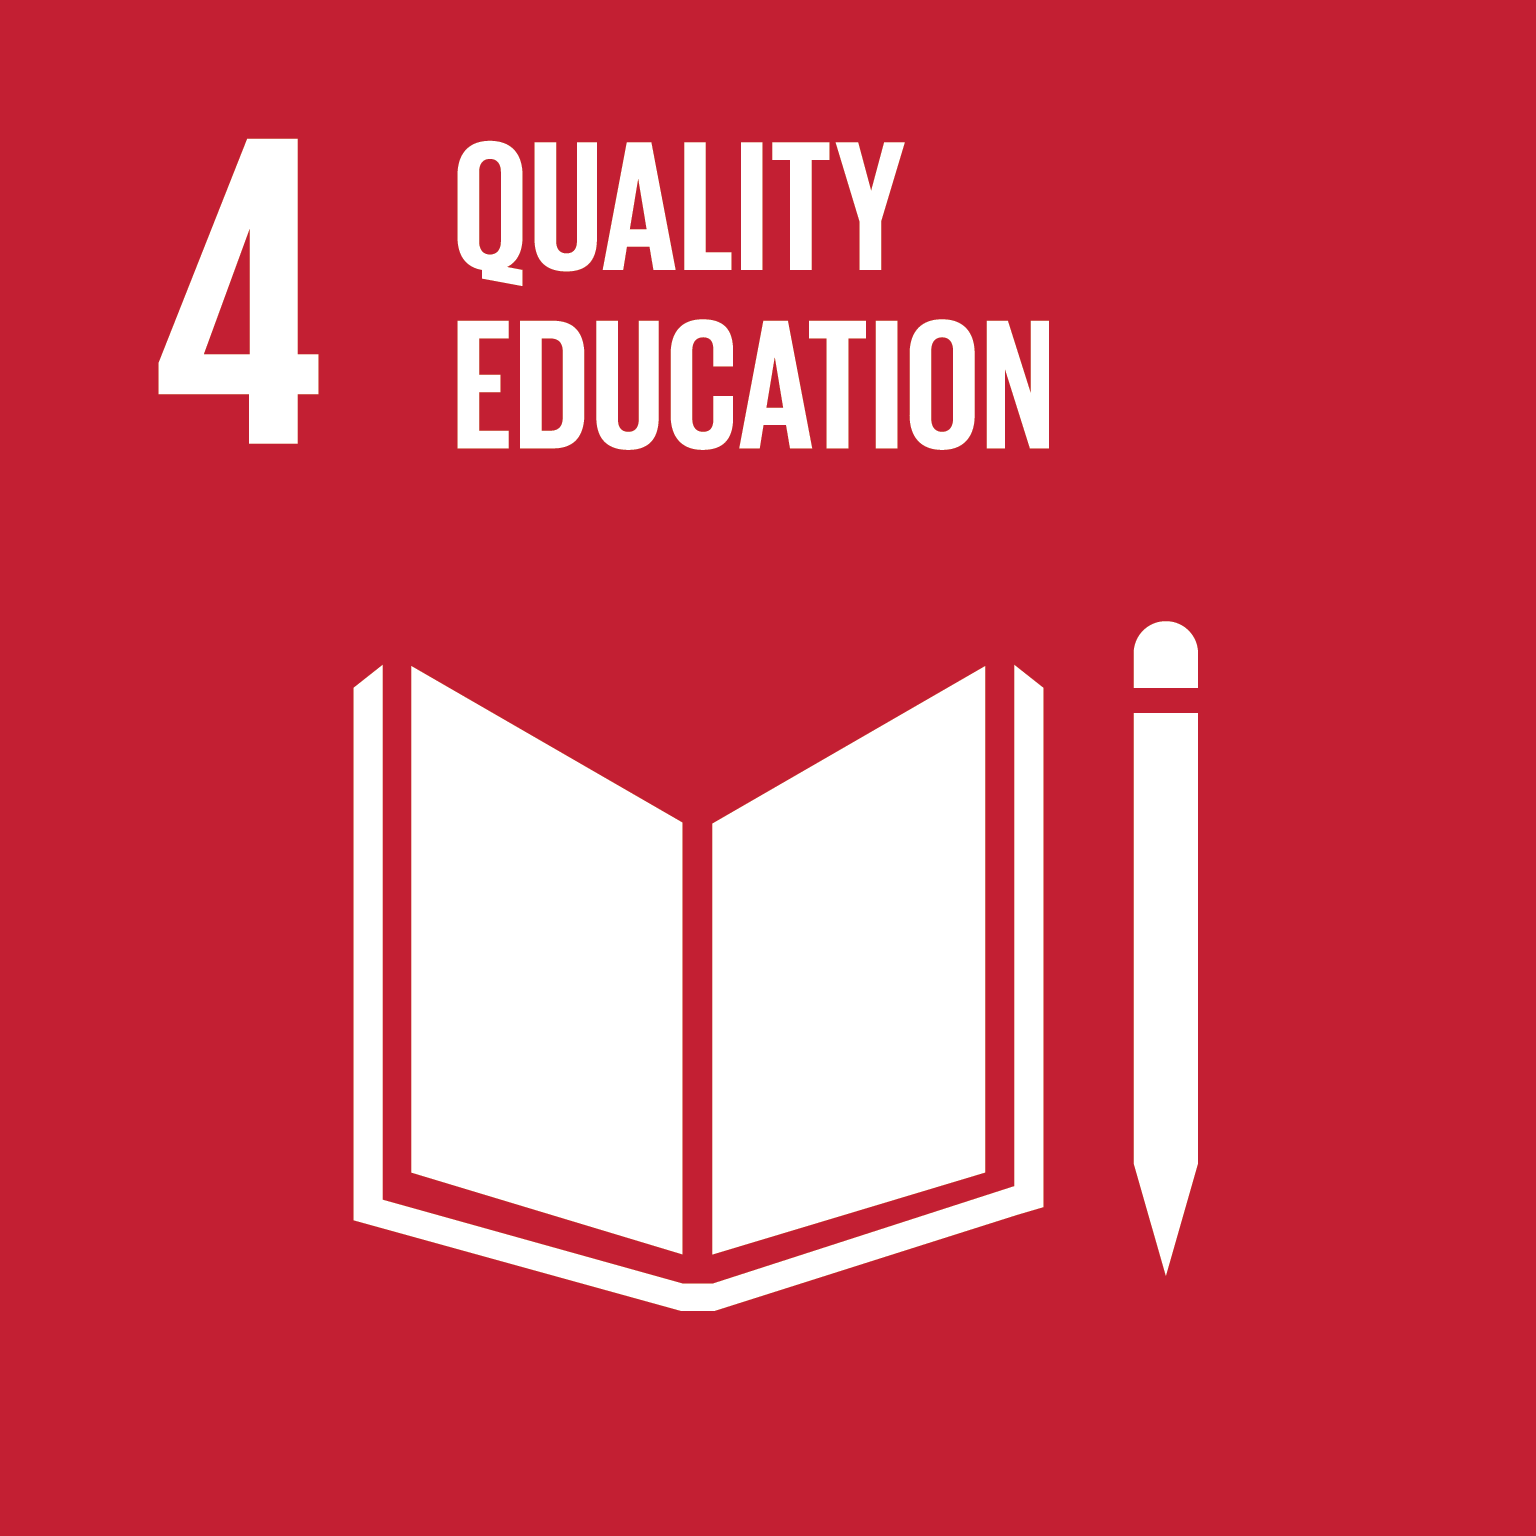 Chiefly - We are commited to the un sustainable development goal of quality education